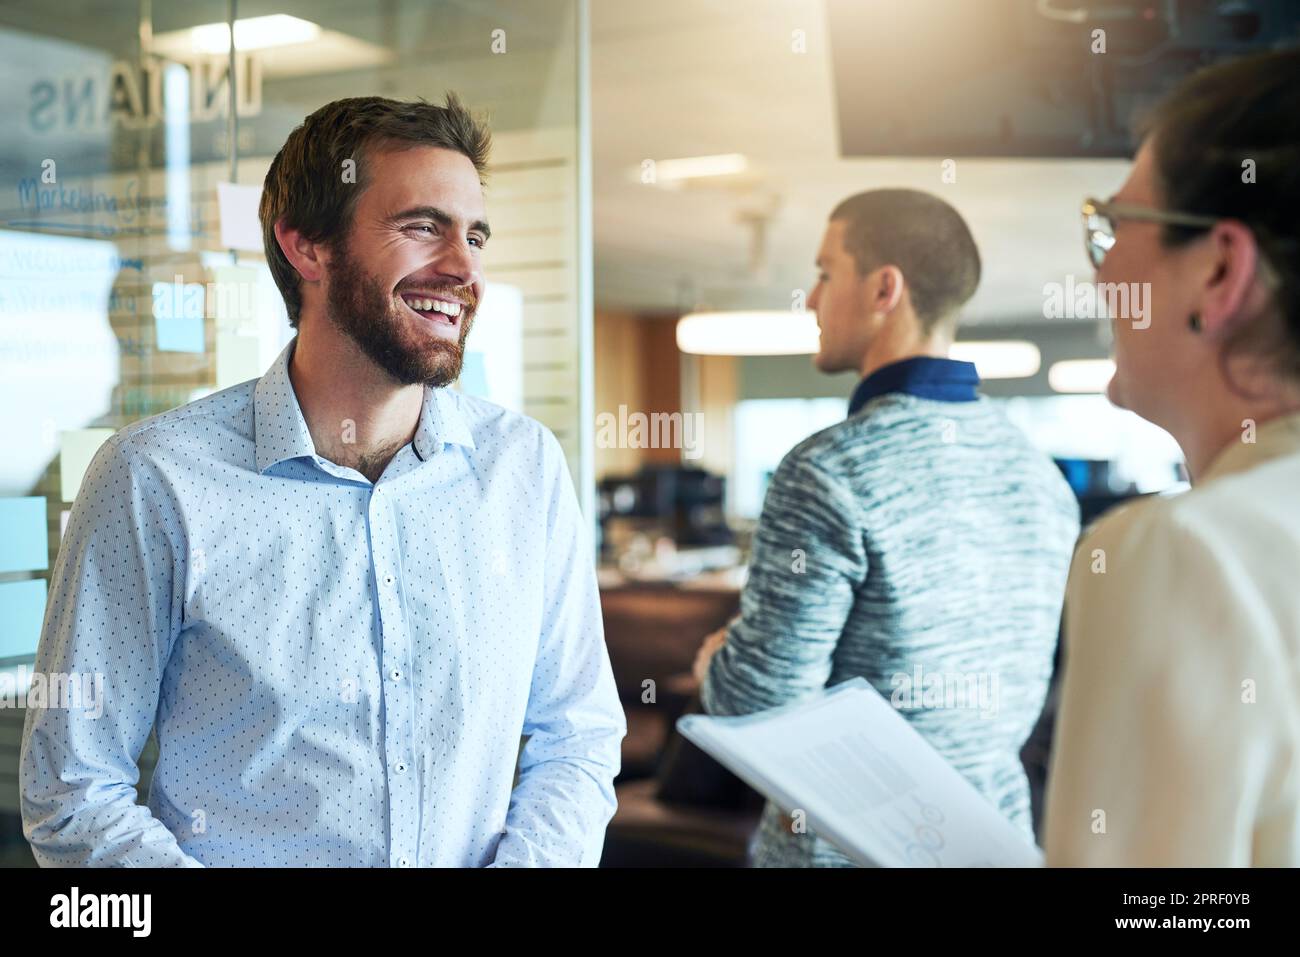 Upholding a positive work ethic makes a difference to business. businesspeople brainstorming in an office. Stock Photo